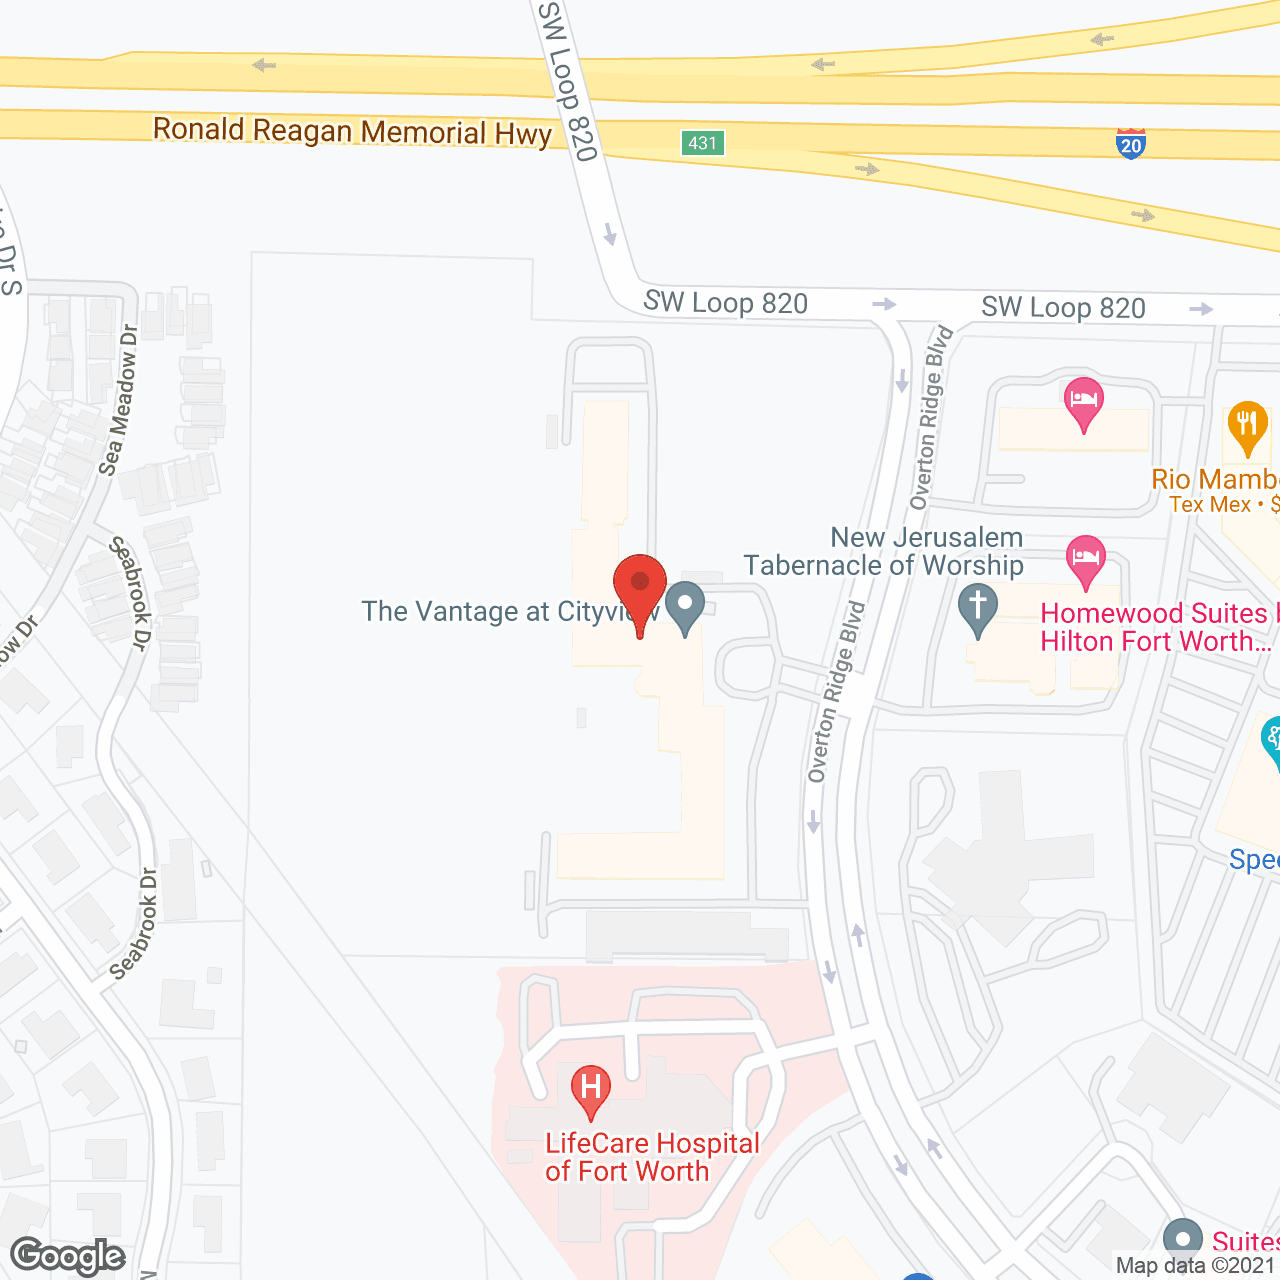 The Vantage at Cityview in google map